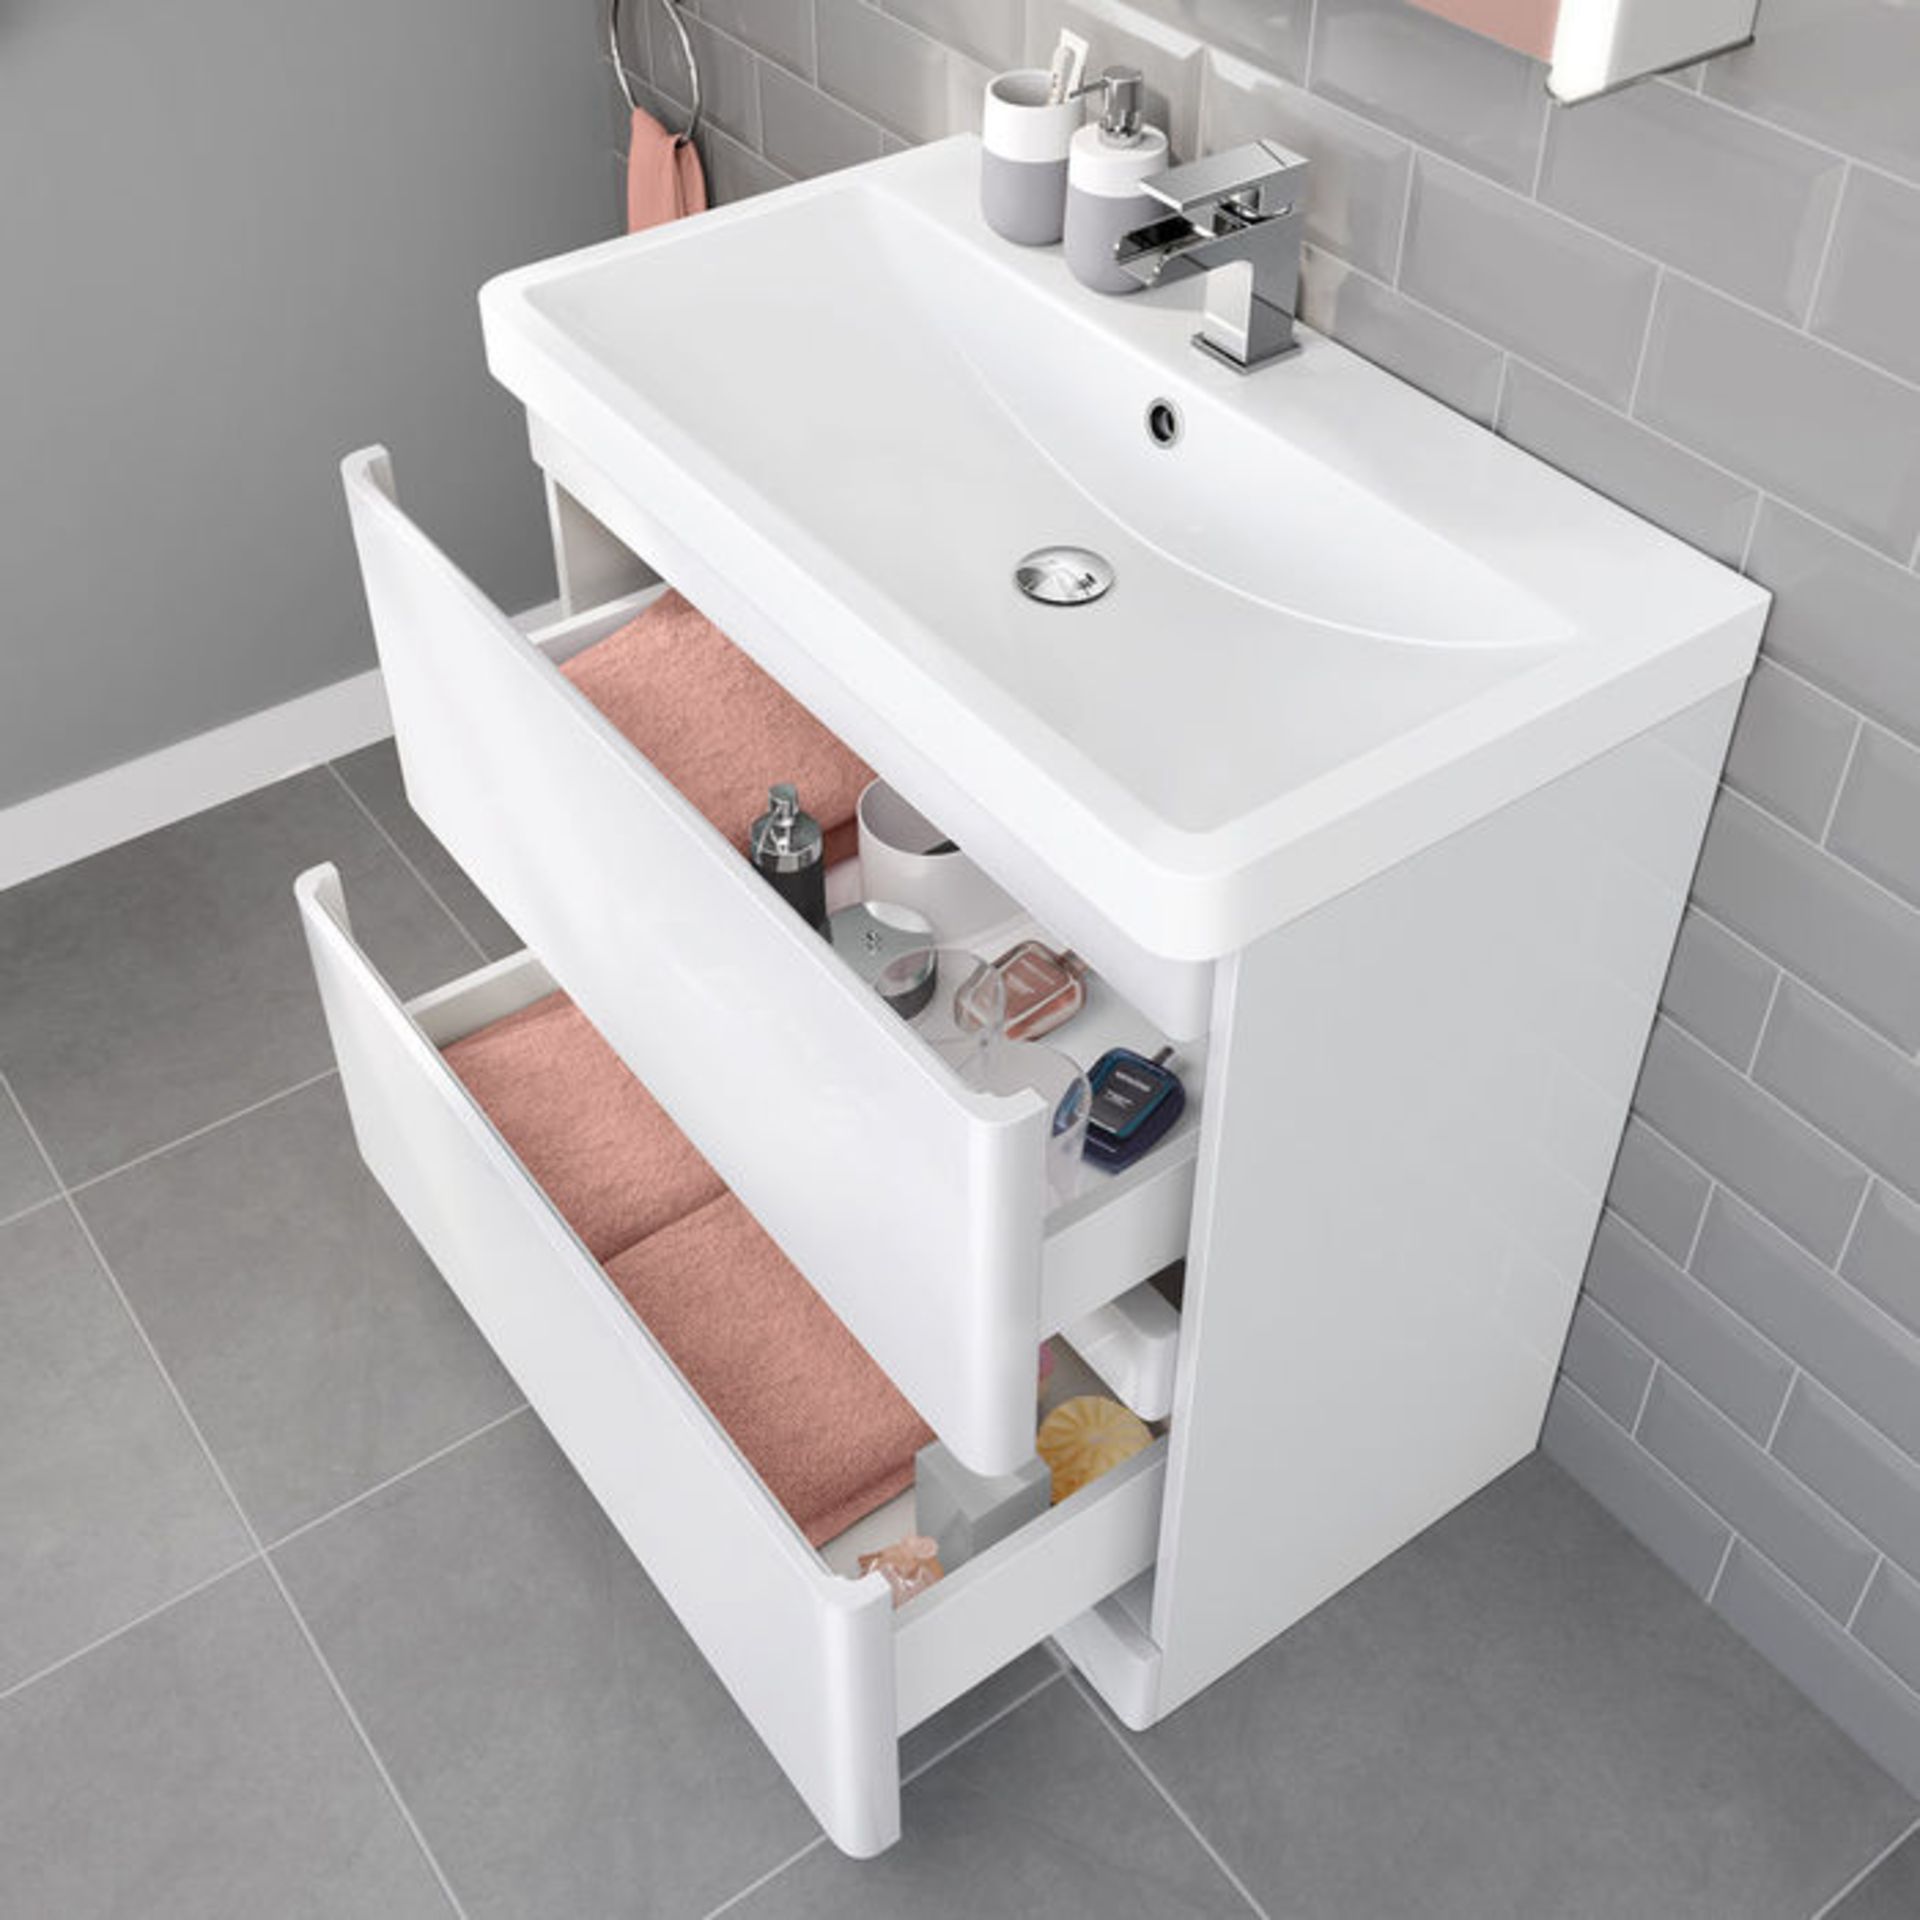 (A23) 800mm Denver Gloss White Built In Sink Drawer Unit - Floor Standing. RRP £549.99. Comes ... - Image 2 of 4